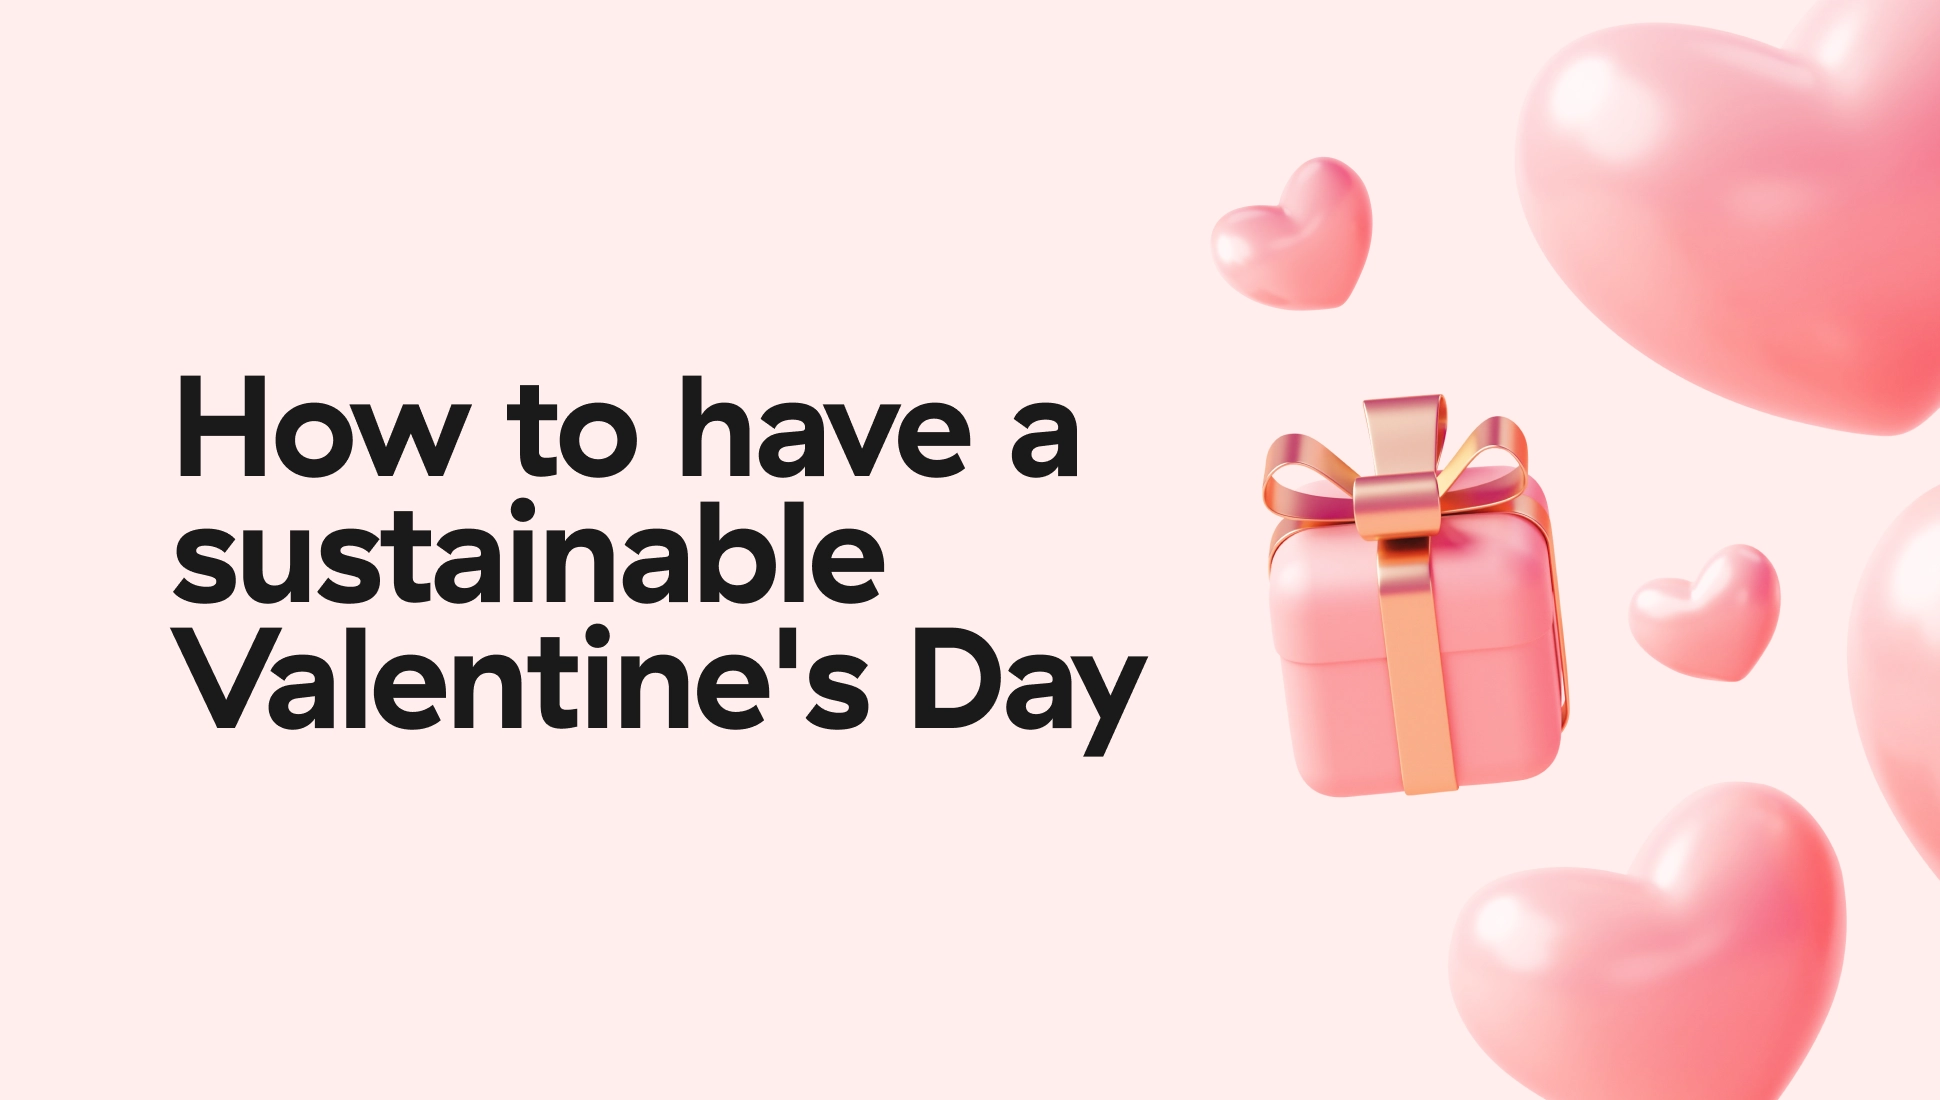 5 tips for a sustainable Valentine’s Day